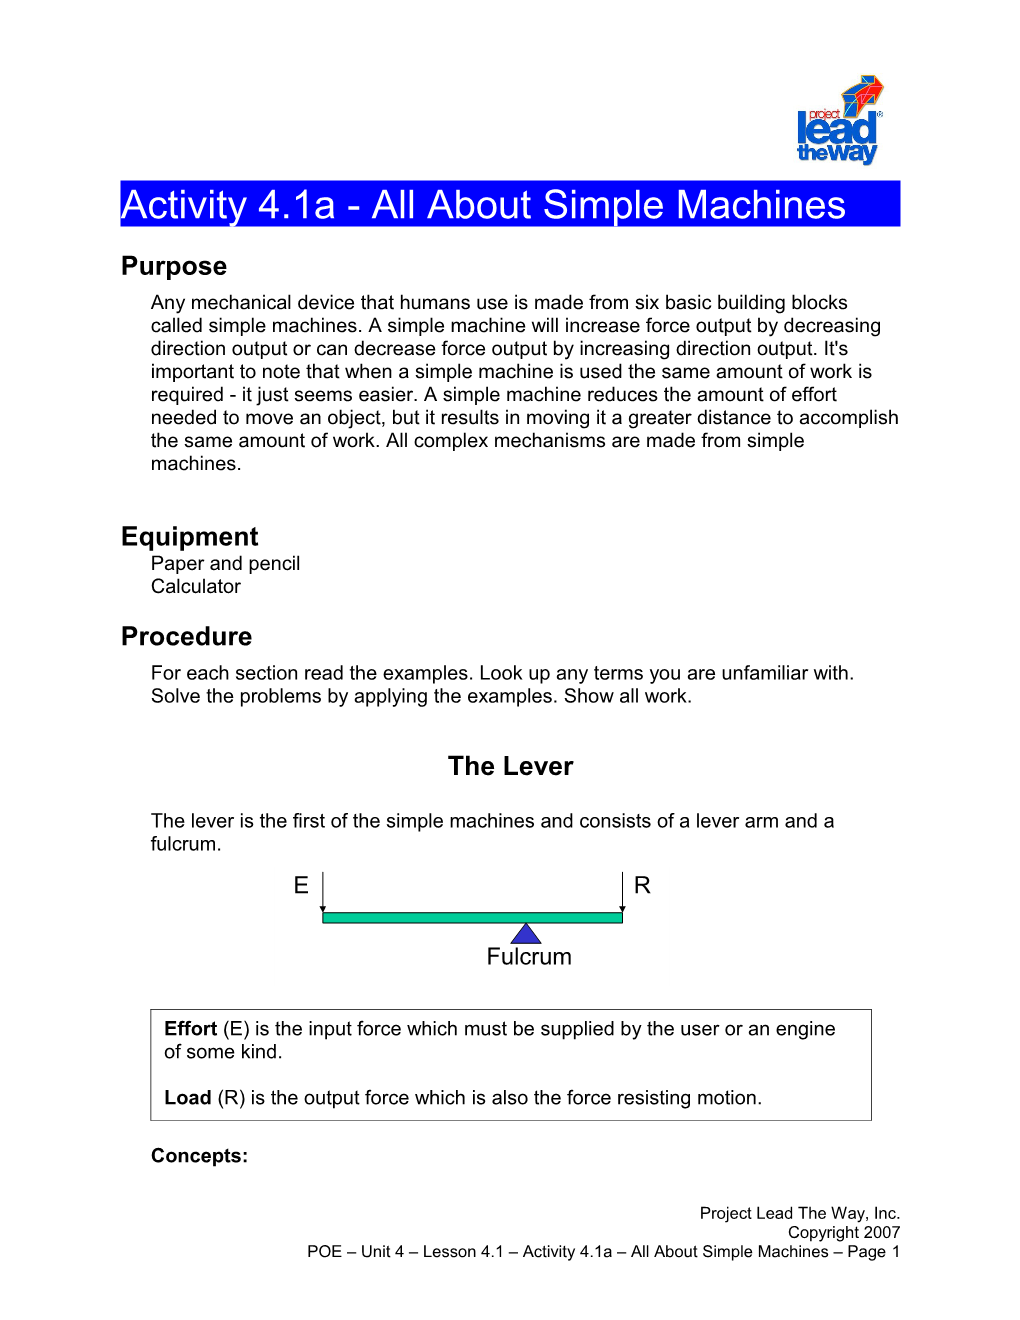 Activity 4.1A - All About Simple Machines